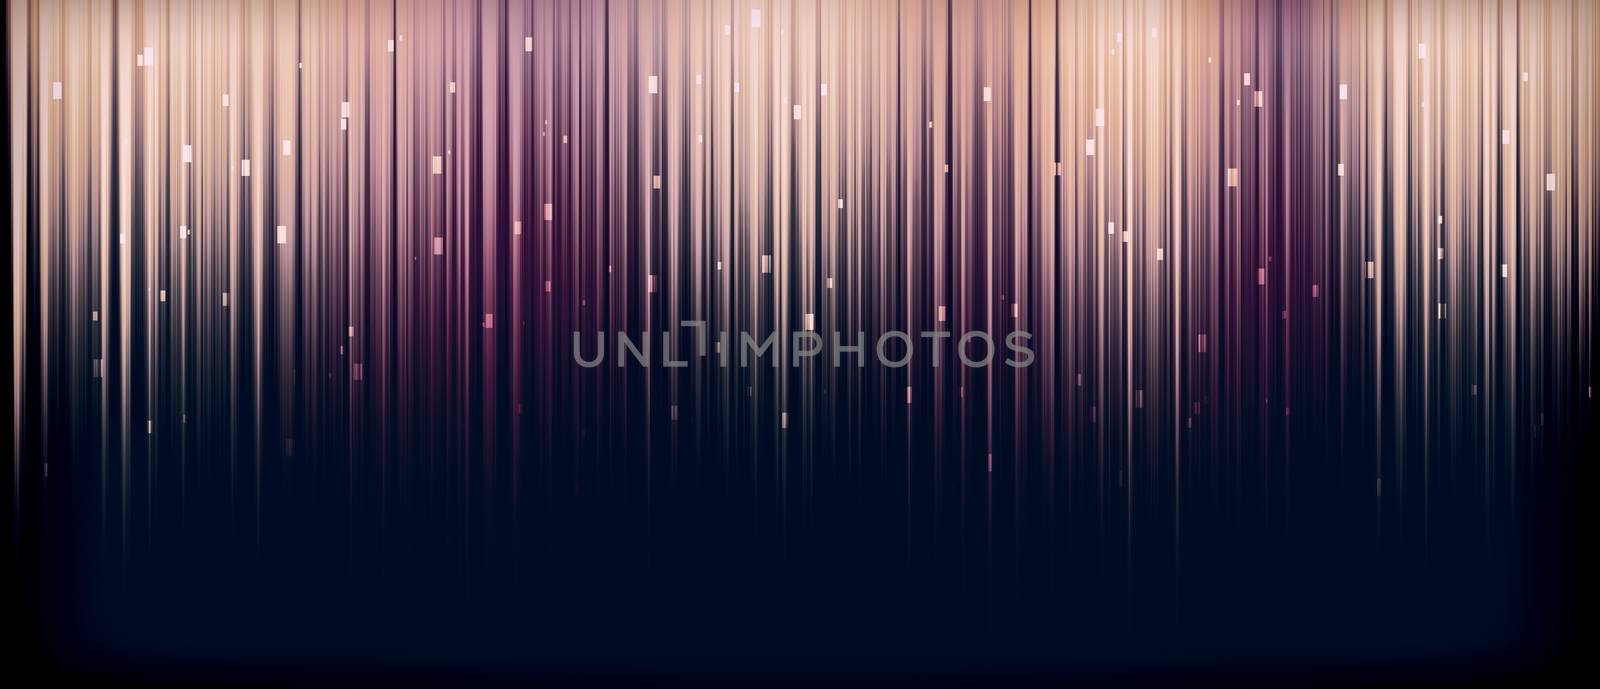 Beautiful festive background with colorful bright stripes and sparks. Copy space at the bottom of the image in dark color.